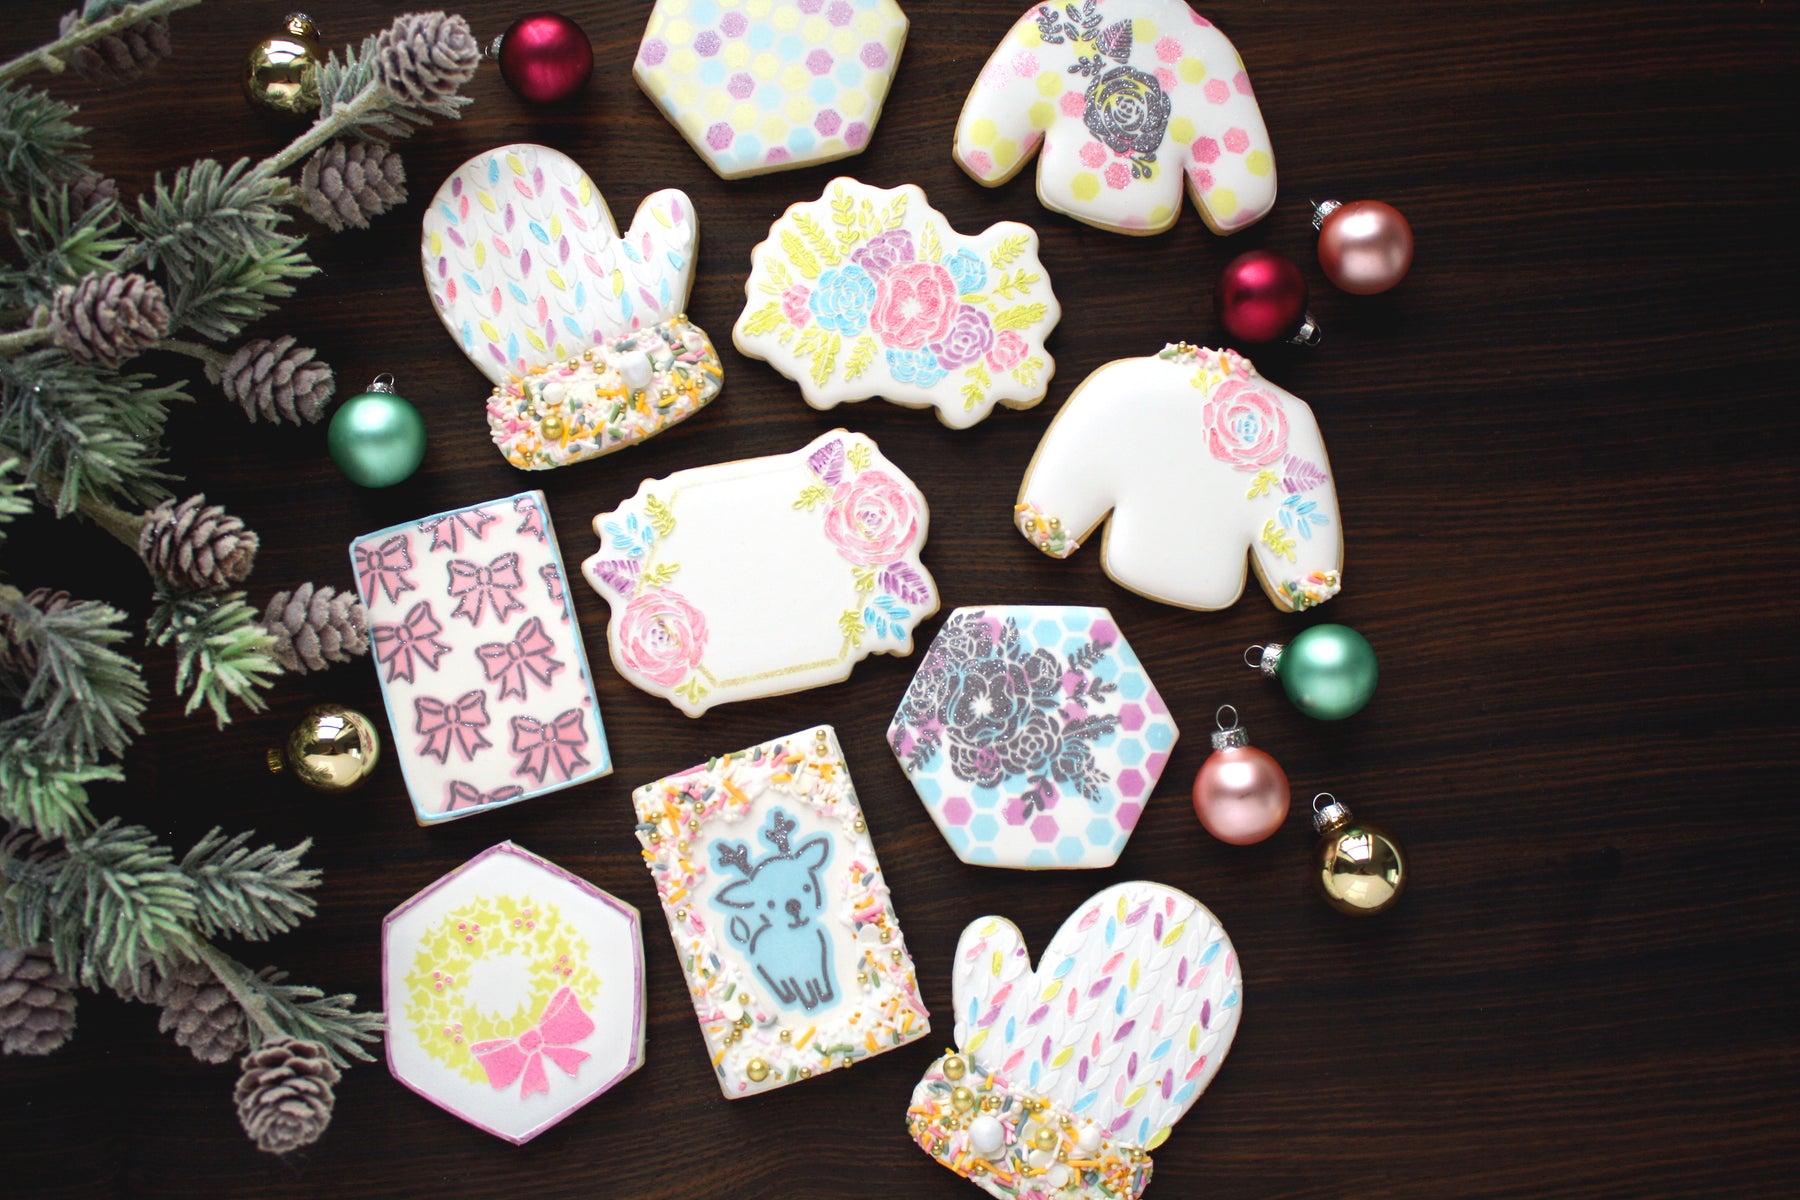 Vintage Inspired Pastel Christmas Cookies - How To